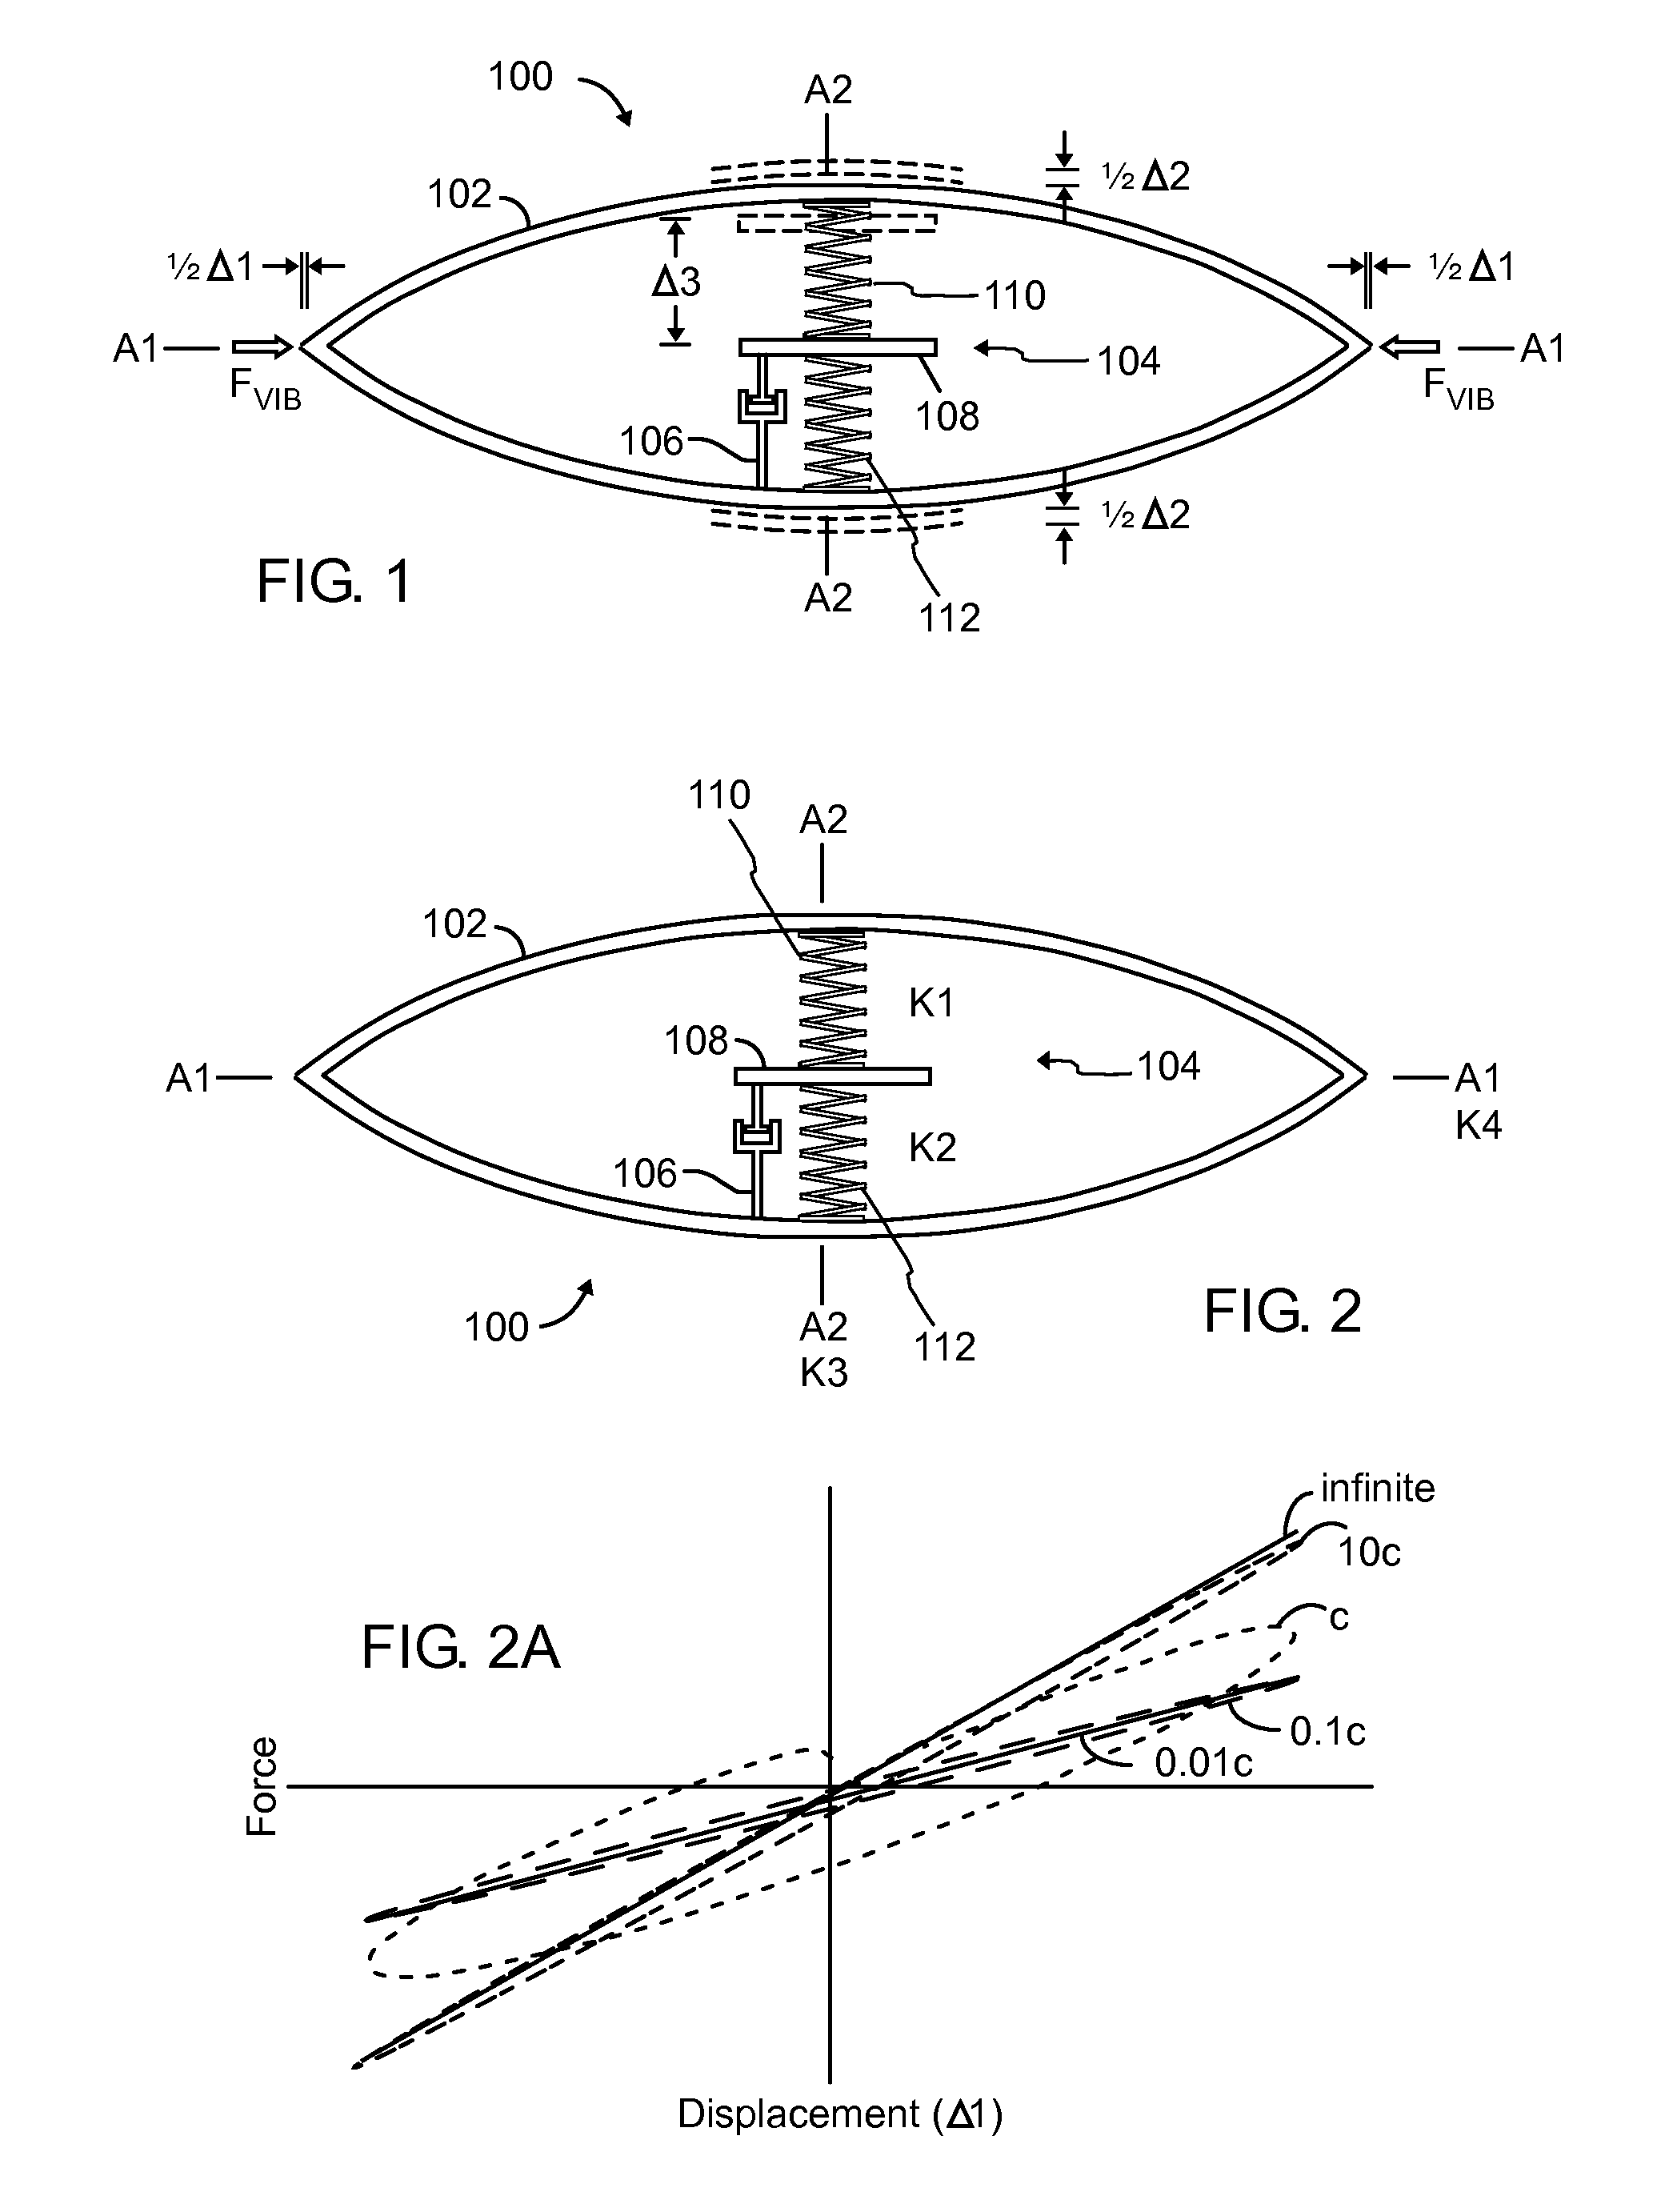 High stiffness vibration damping apparatus, methods and systems